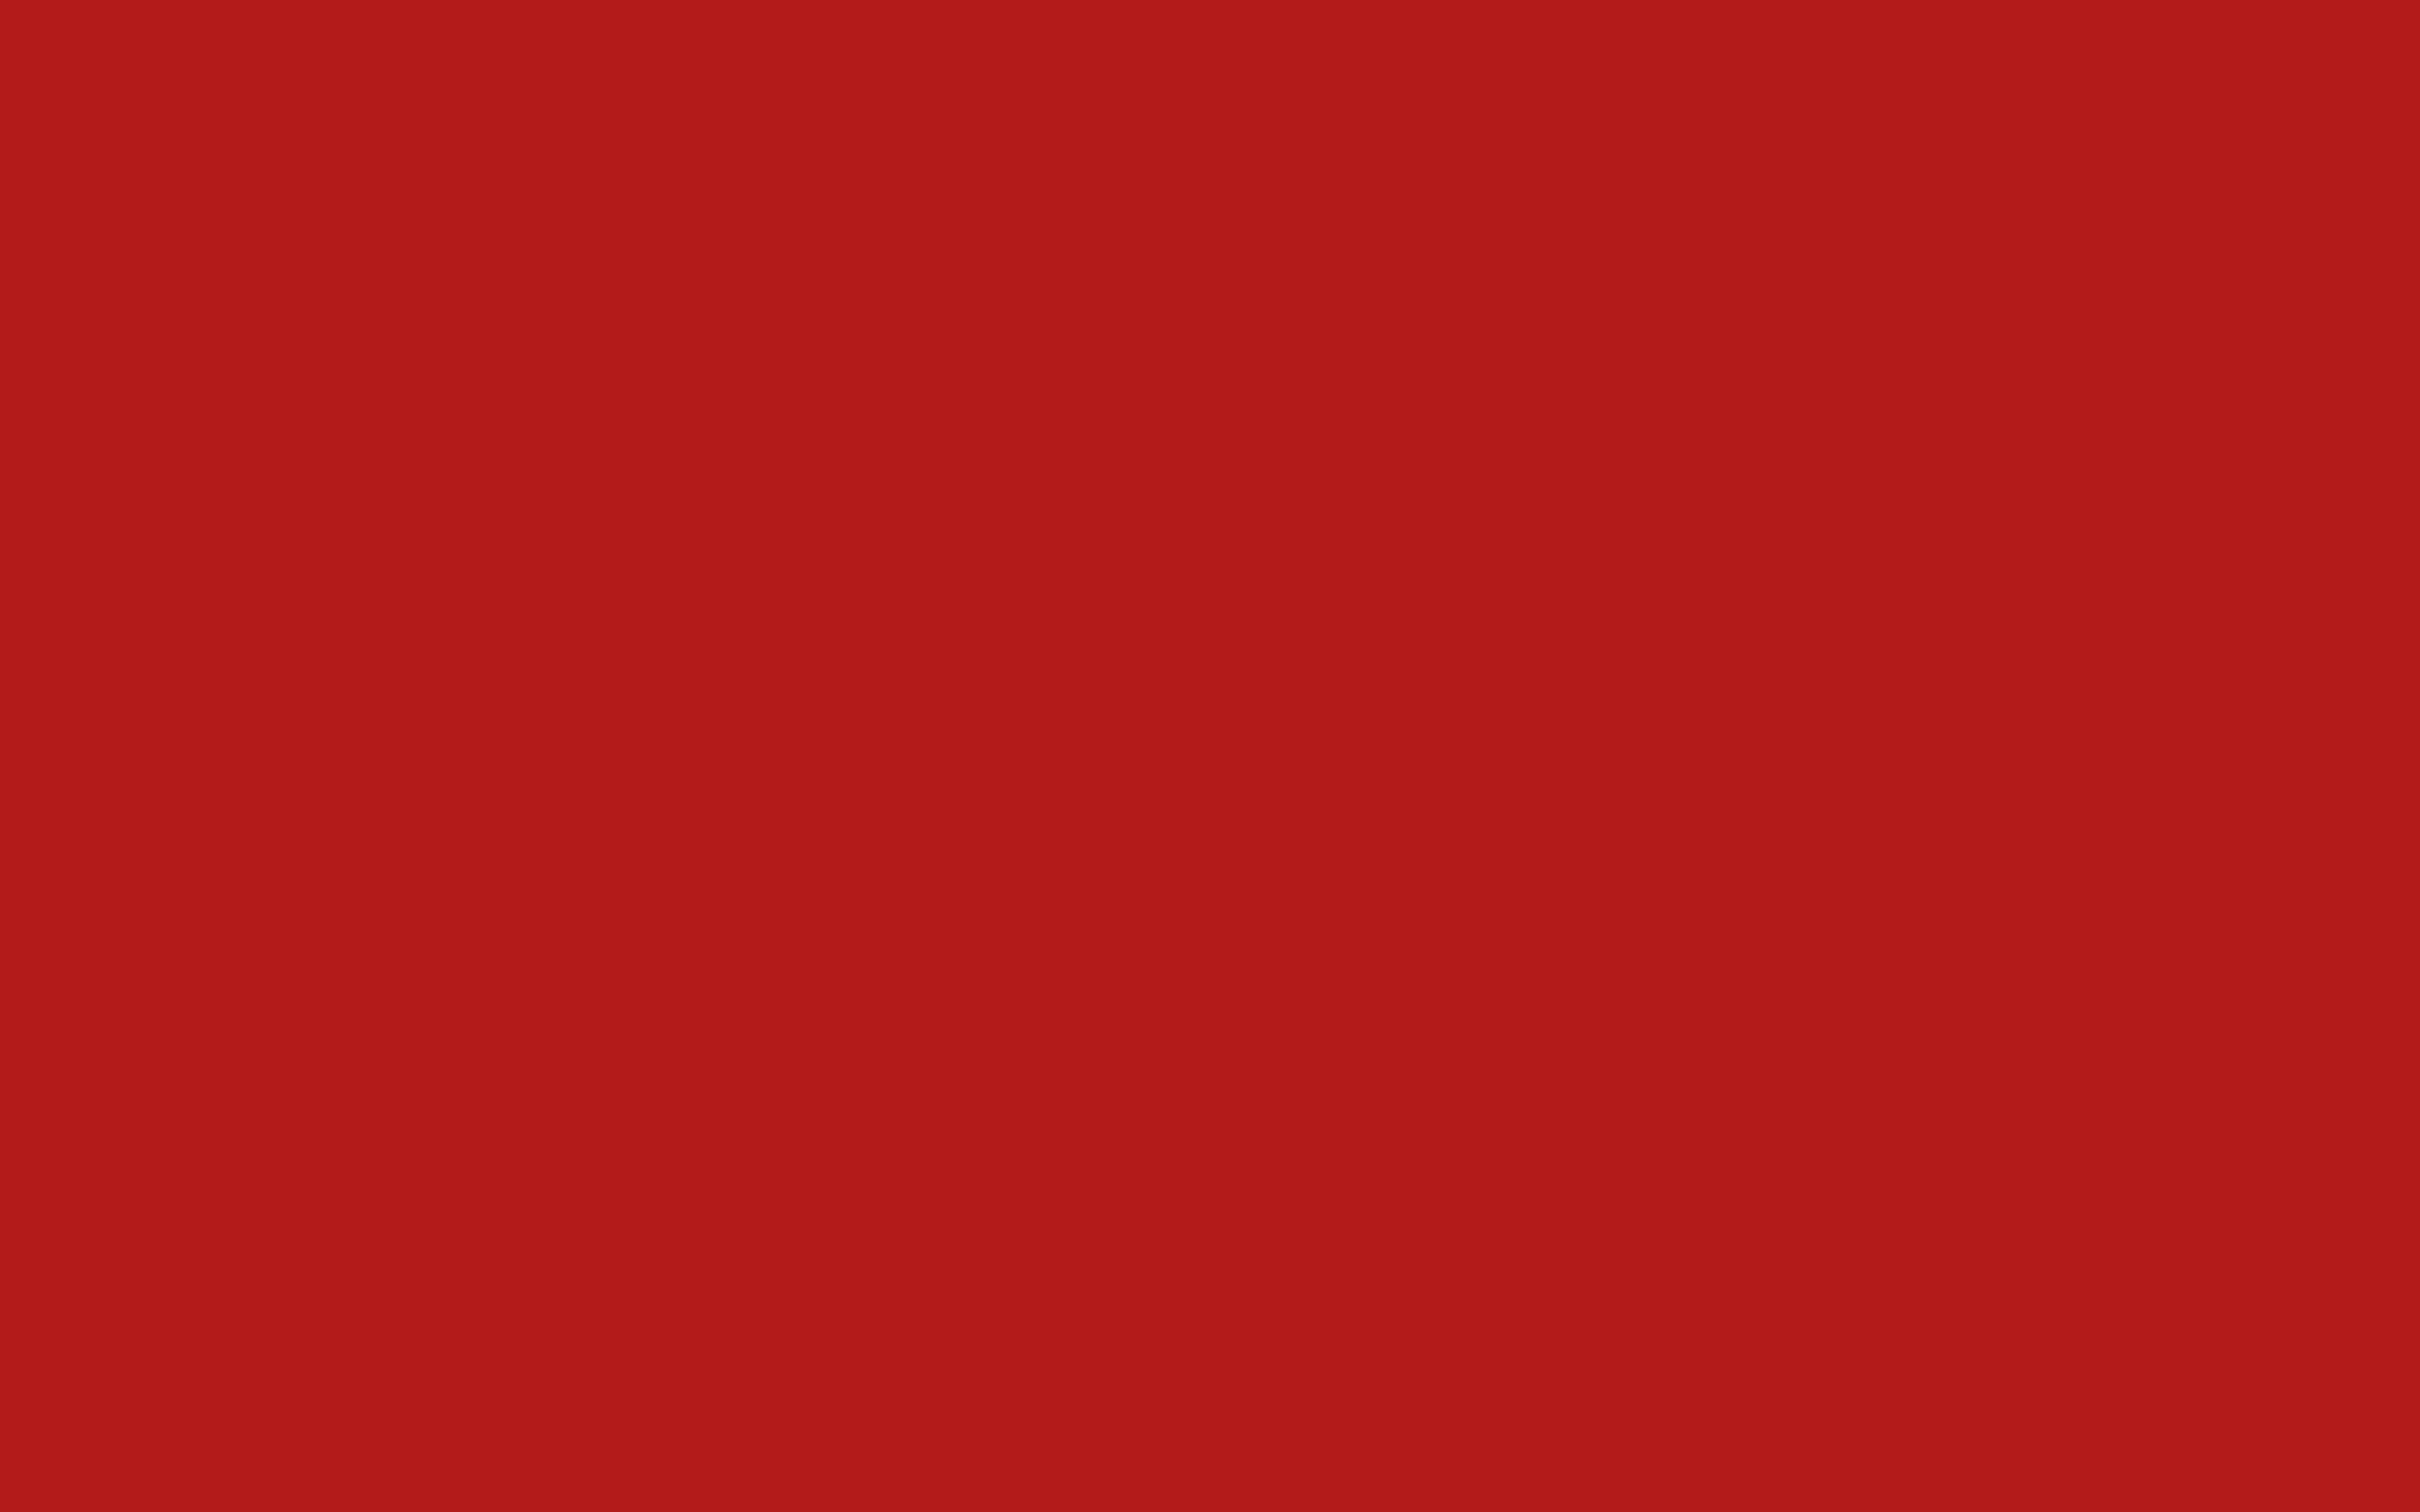 Background Color Solid Red Cornell Image